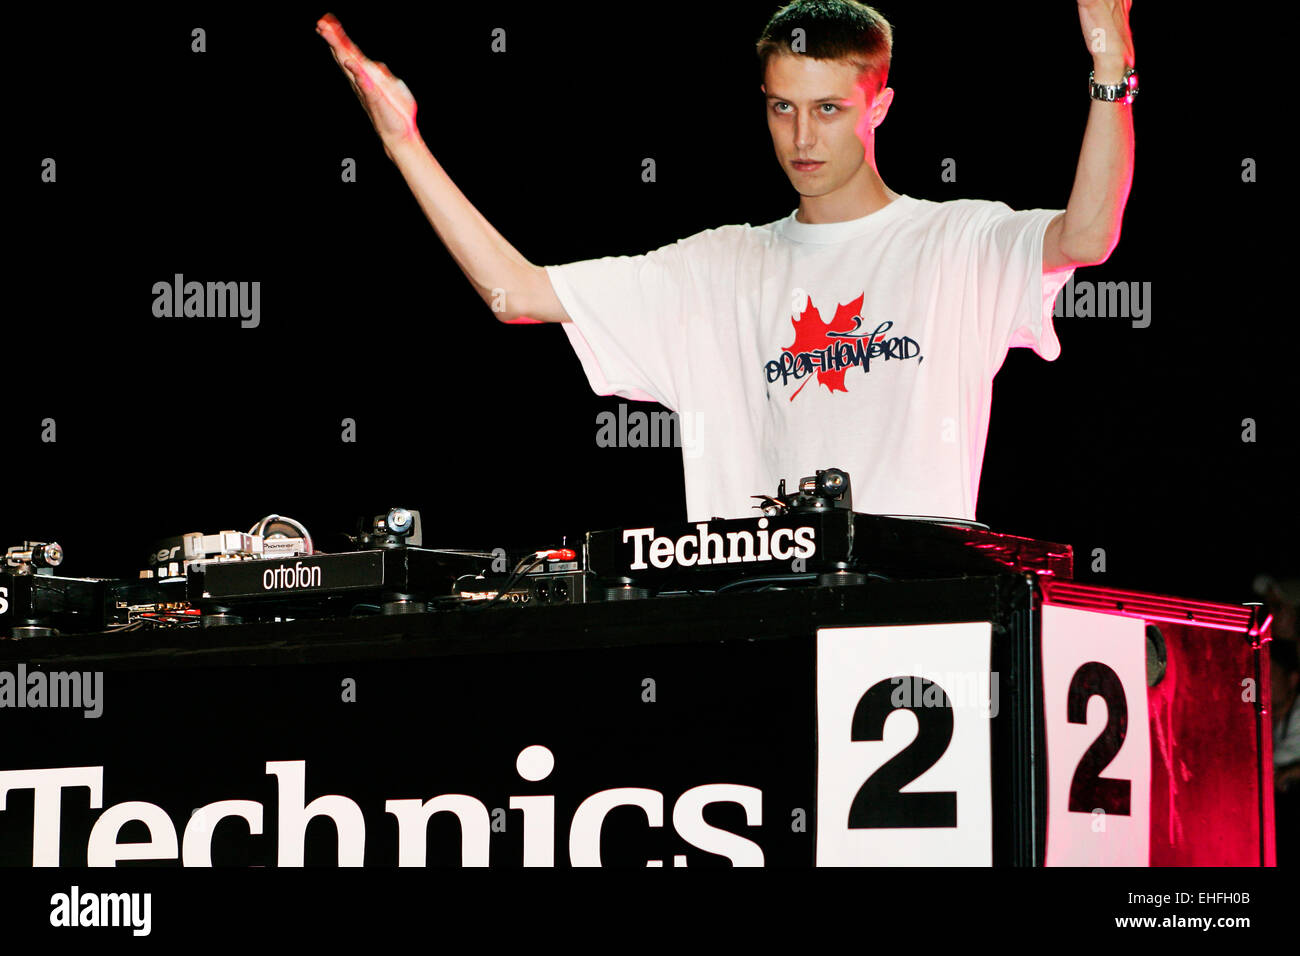 Drastik from Canada DJing in the Battle for World Supremacy at the DMC/Technics World DJ Championships at Hammersmith Apollo. Stock Photo